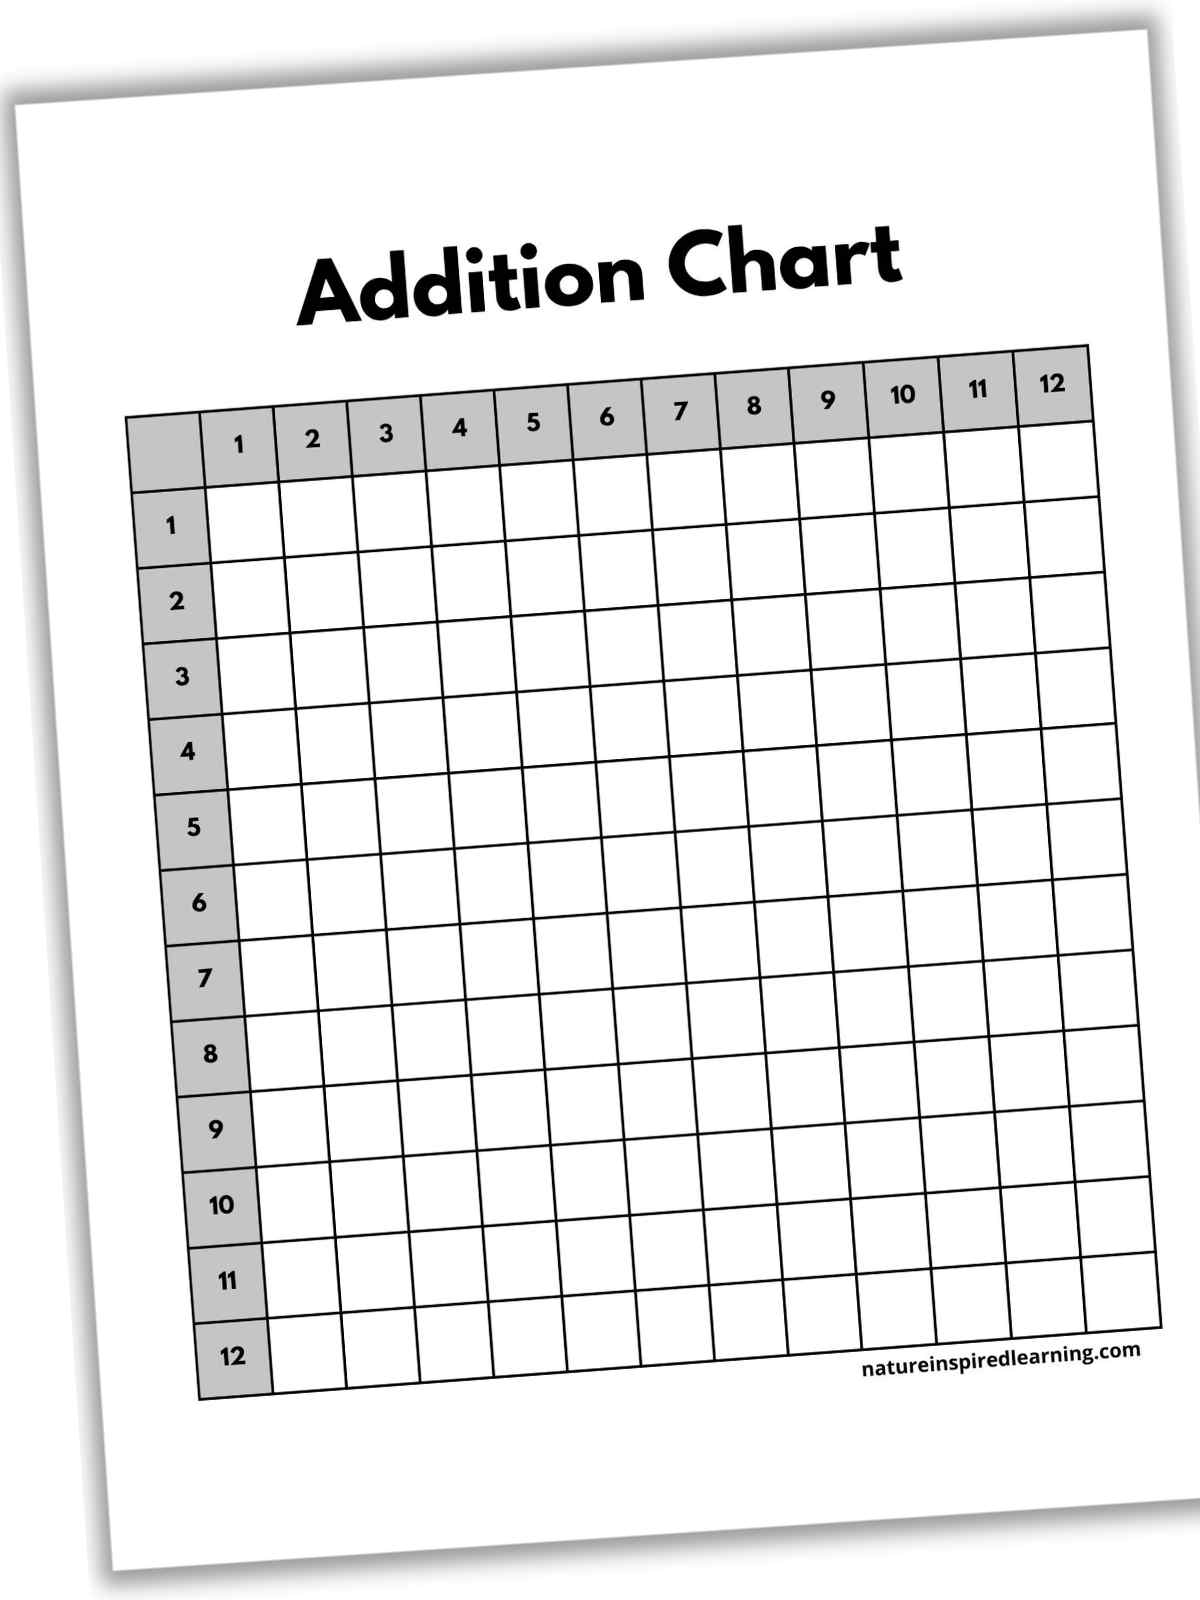 blank black and white addition chart with numbers 1 through 10 grey boxes with the numbers 1-12 down the side and across the top